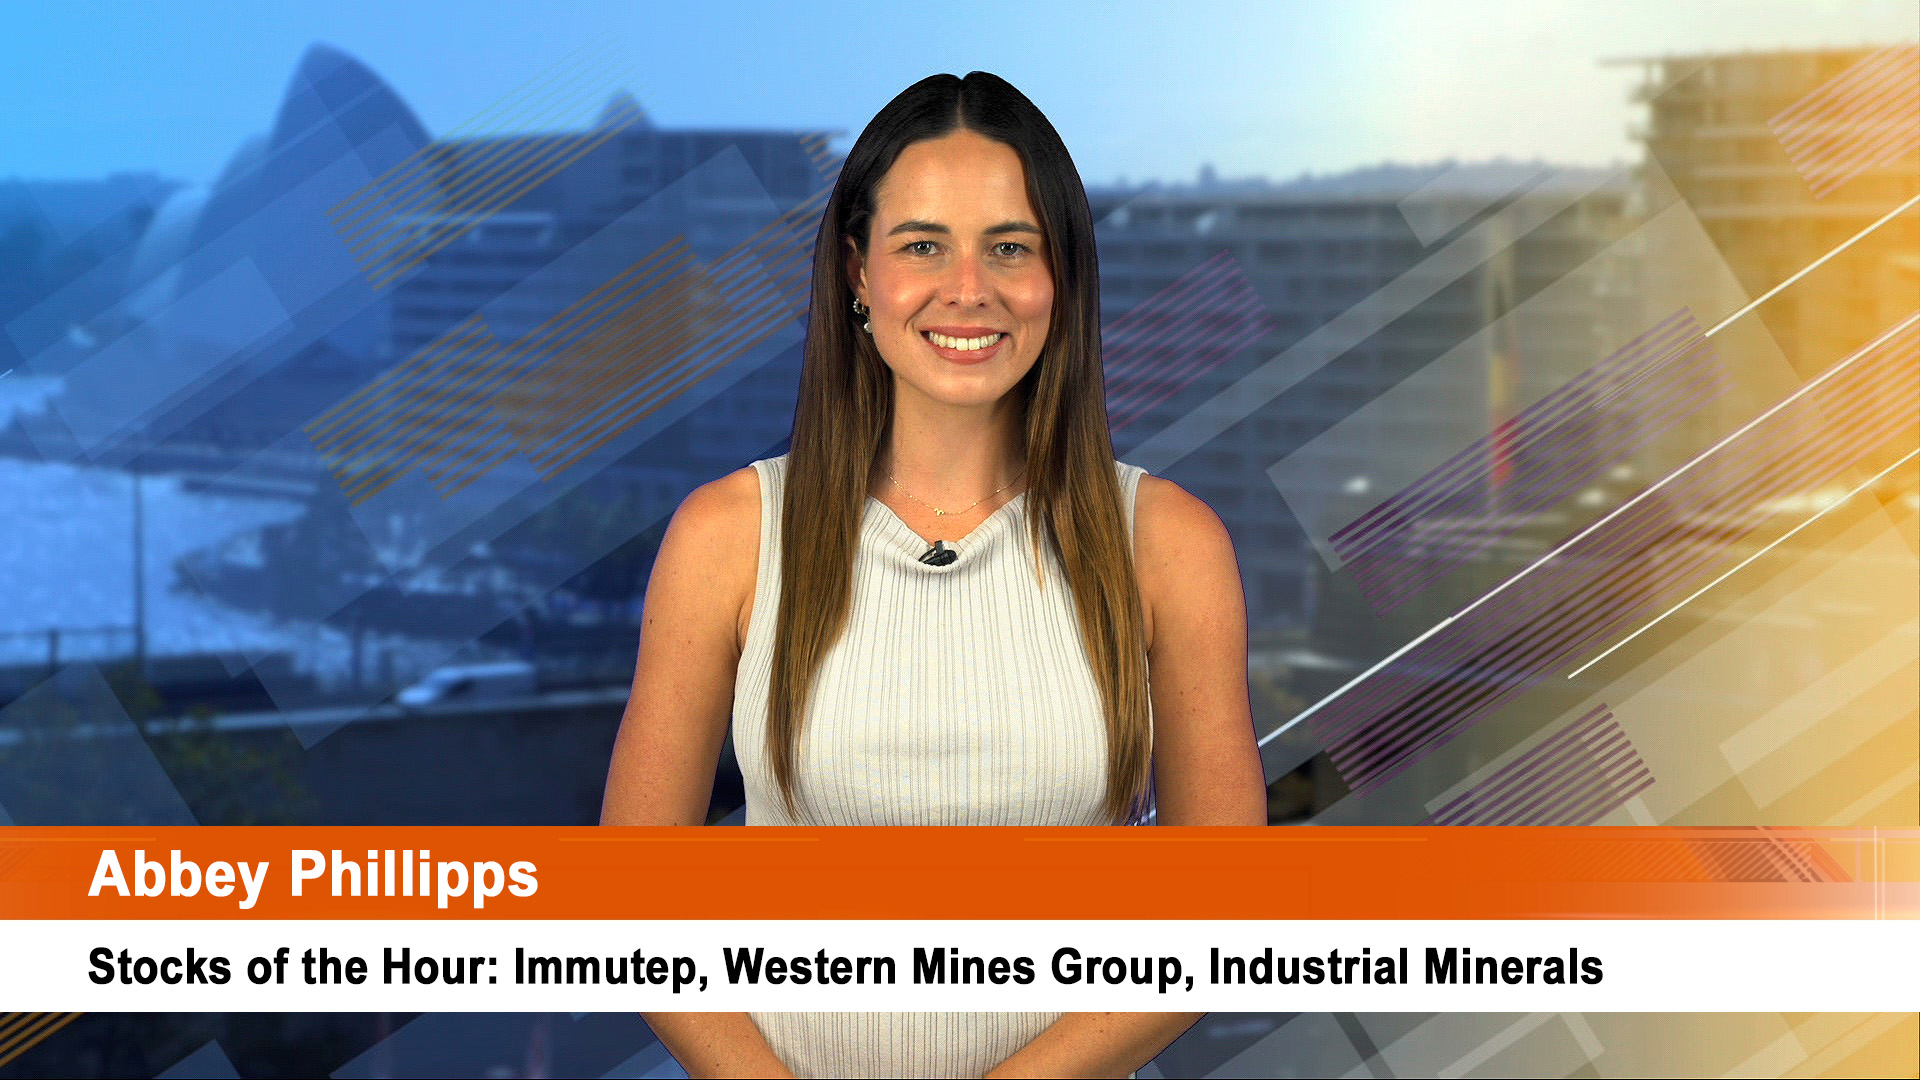 Stocks of the Hour: Immutep, Western Mines Group, Industrial Minerals